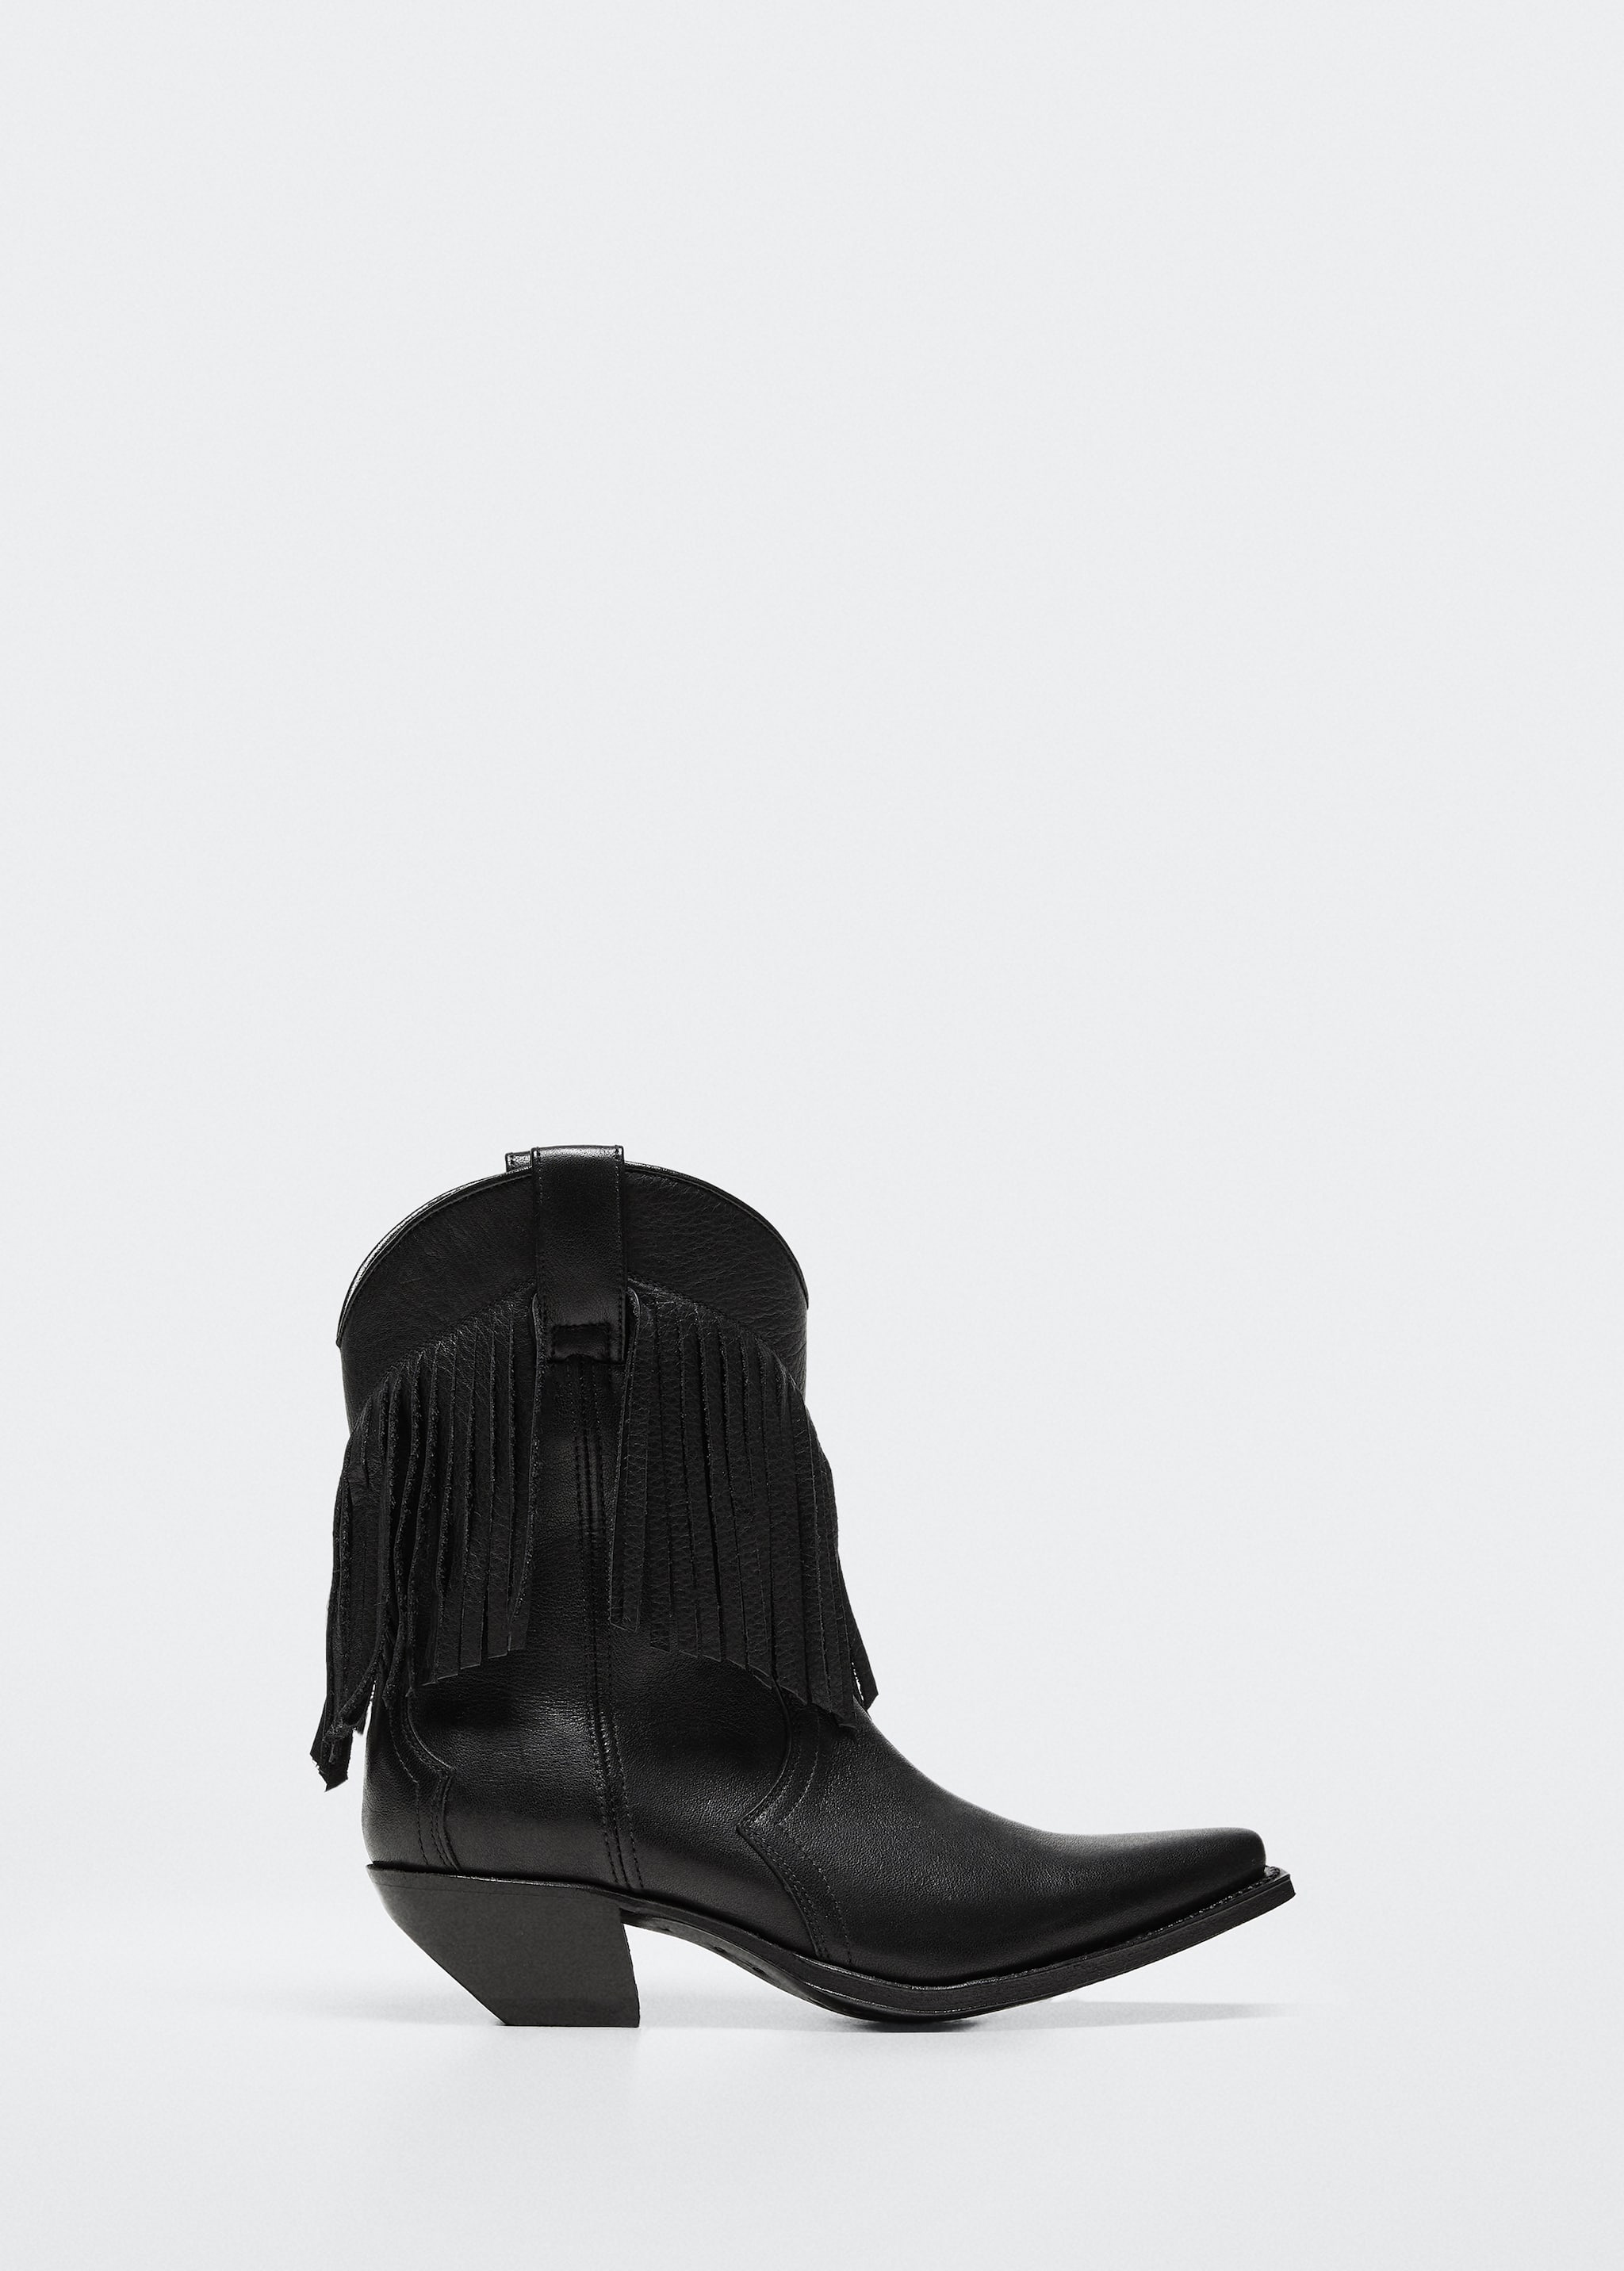 Fringed leather boots - Article without model